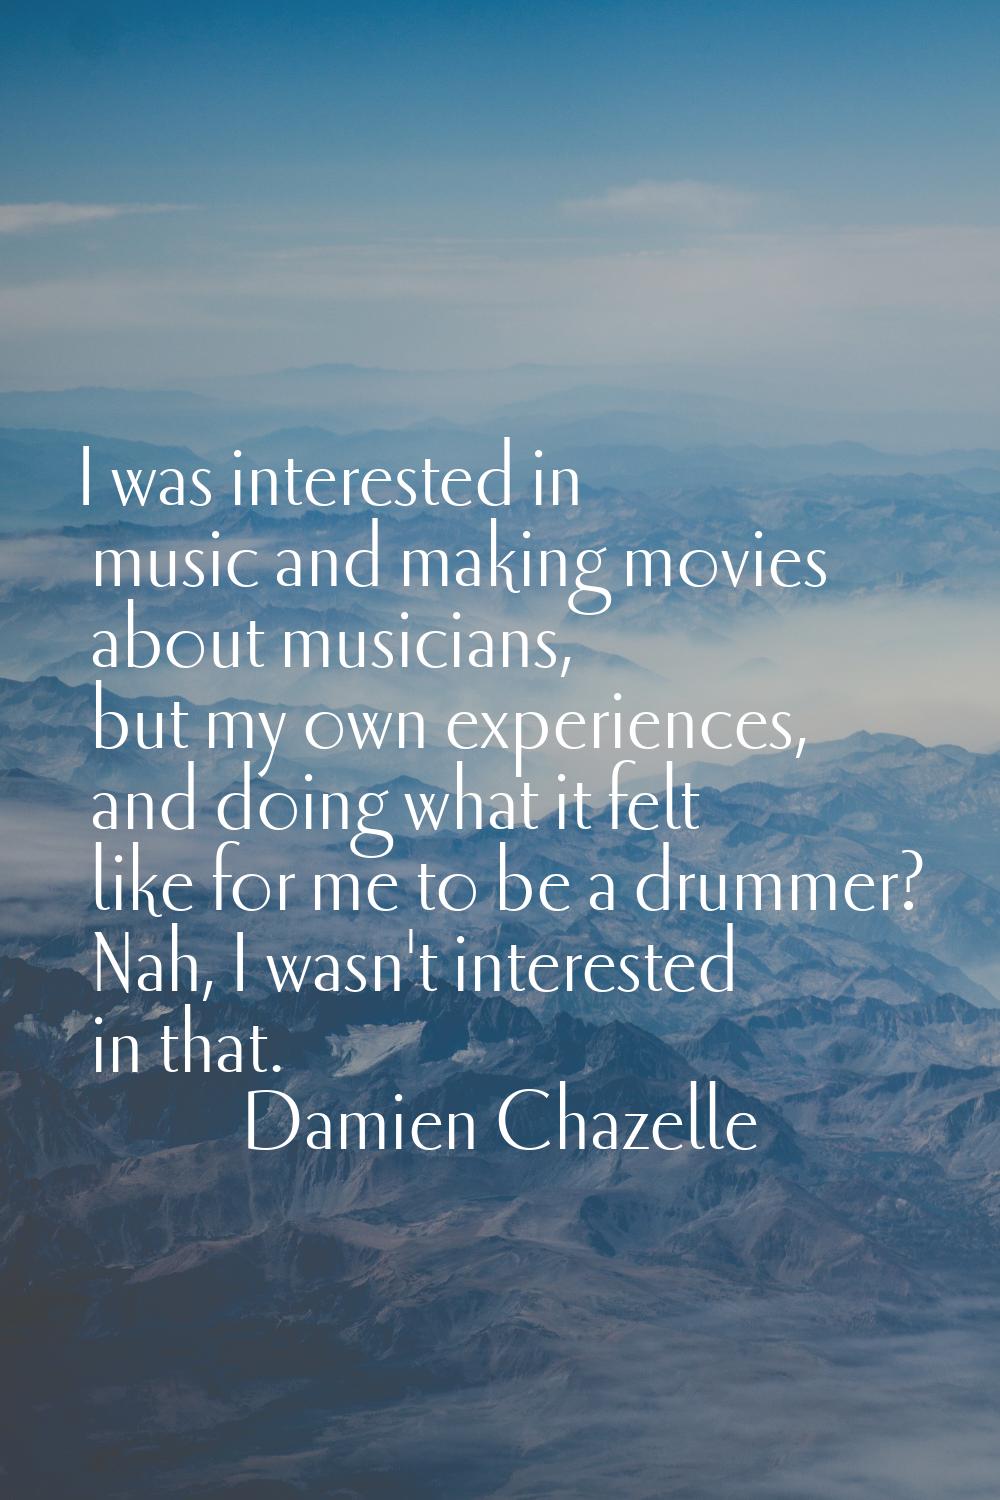 I was interested in music and making movies about musicians, but my own experiences, and doing what